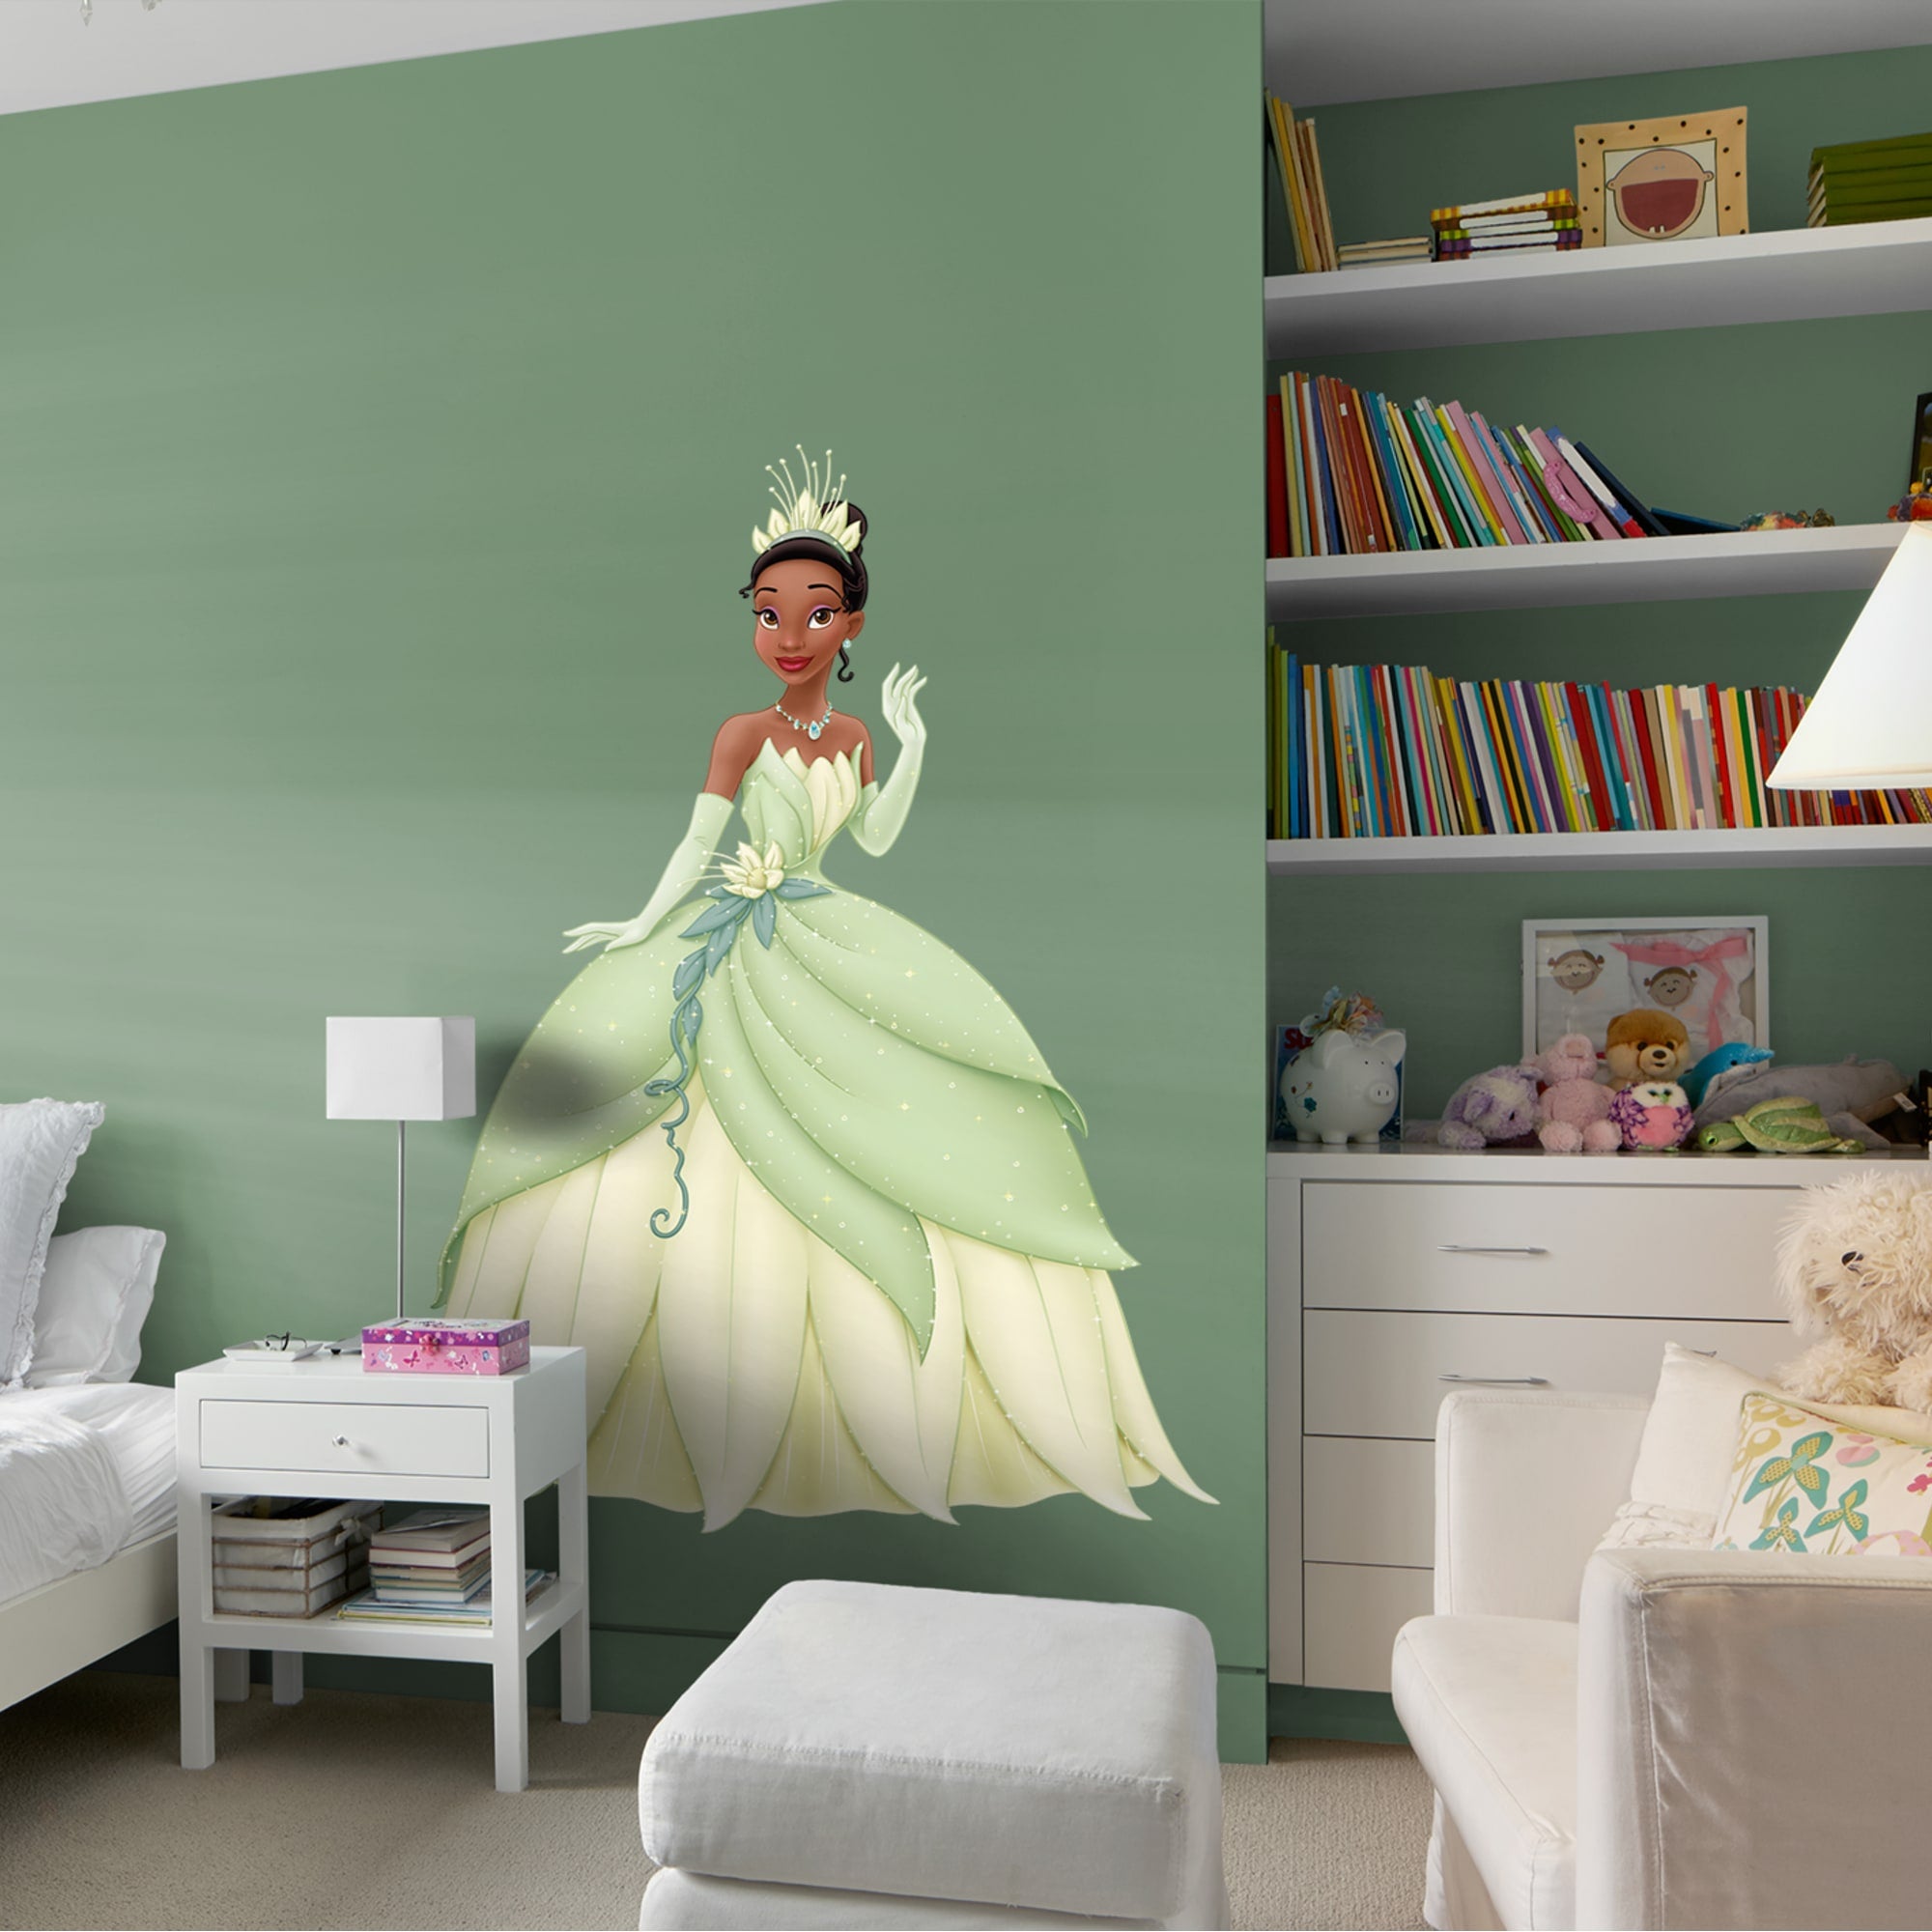 Princess Tiana - Officially Licensed Disney Removable Wall Decal 48.0"W x 62.0"H by Fathead | Vinyl